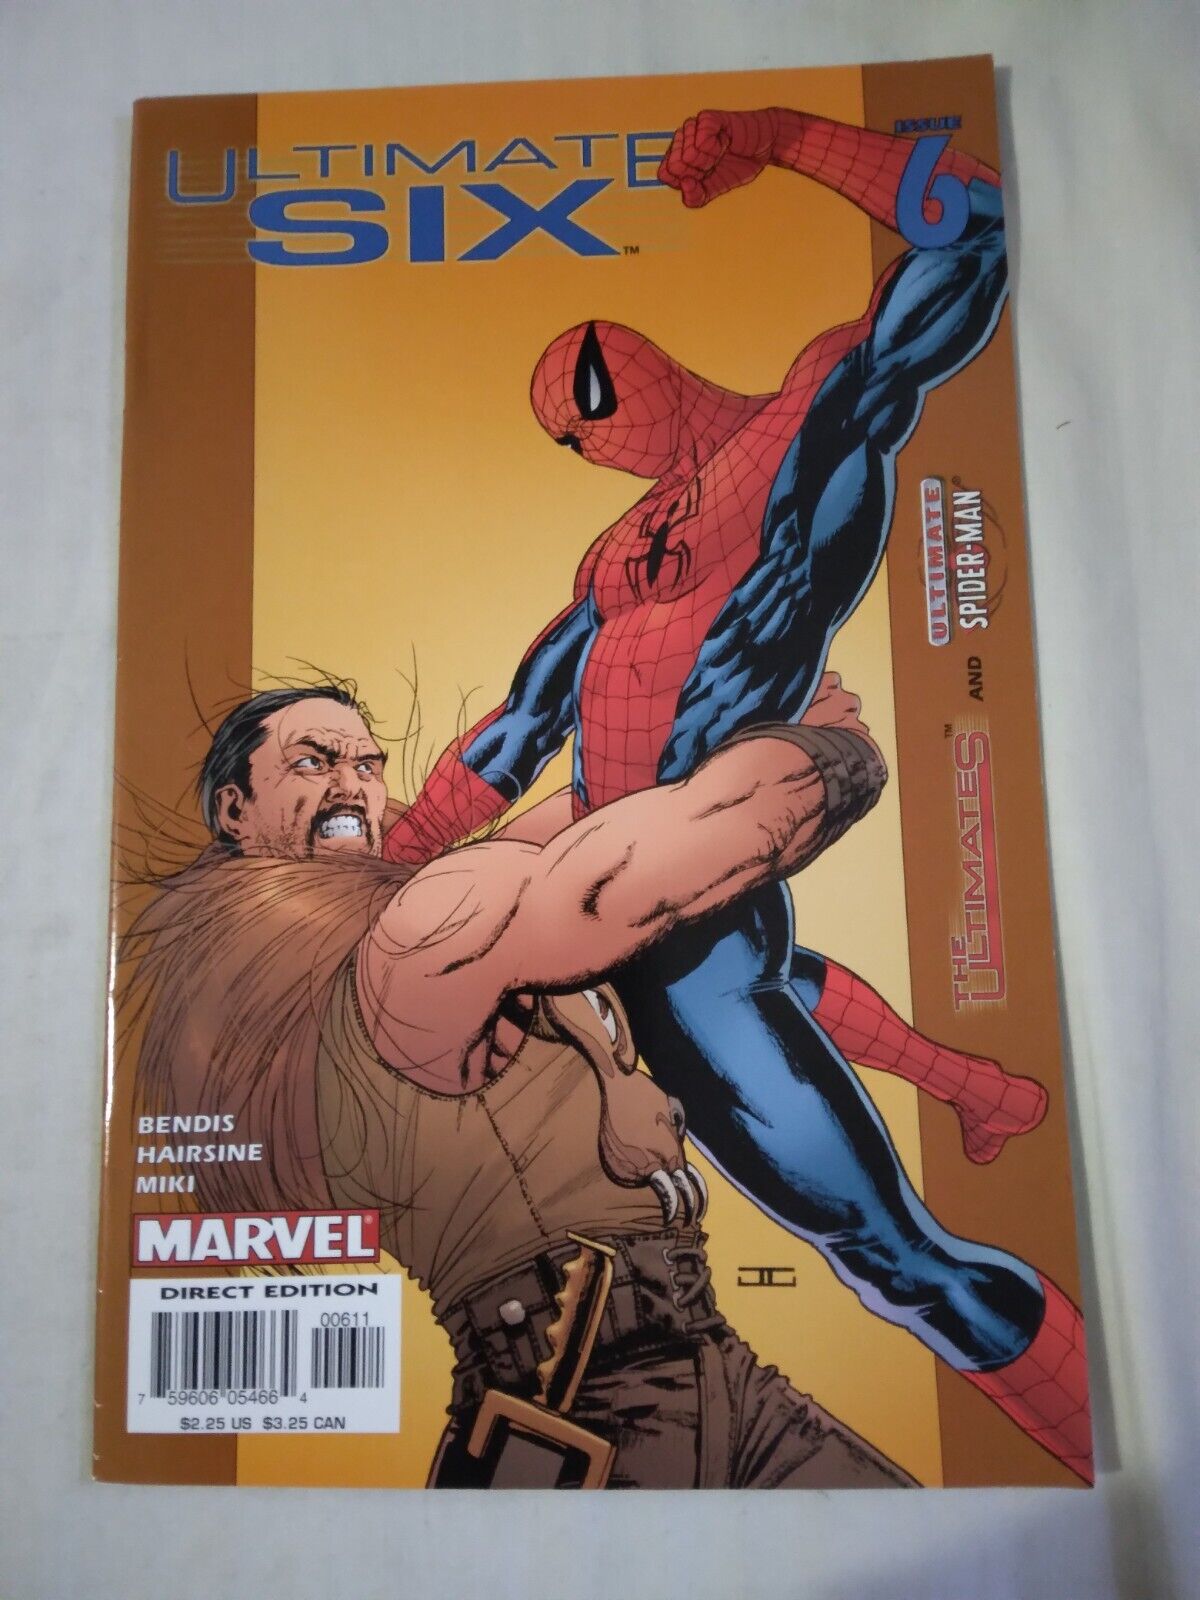 Ultimate Six (March 2004, Marvel) #6. Qwe Combine Shipping. B&B